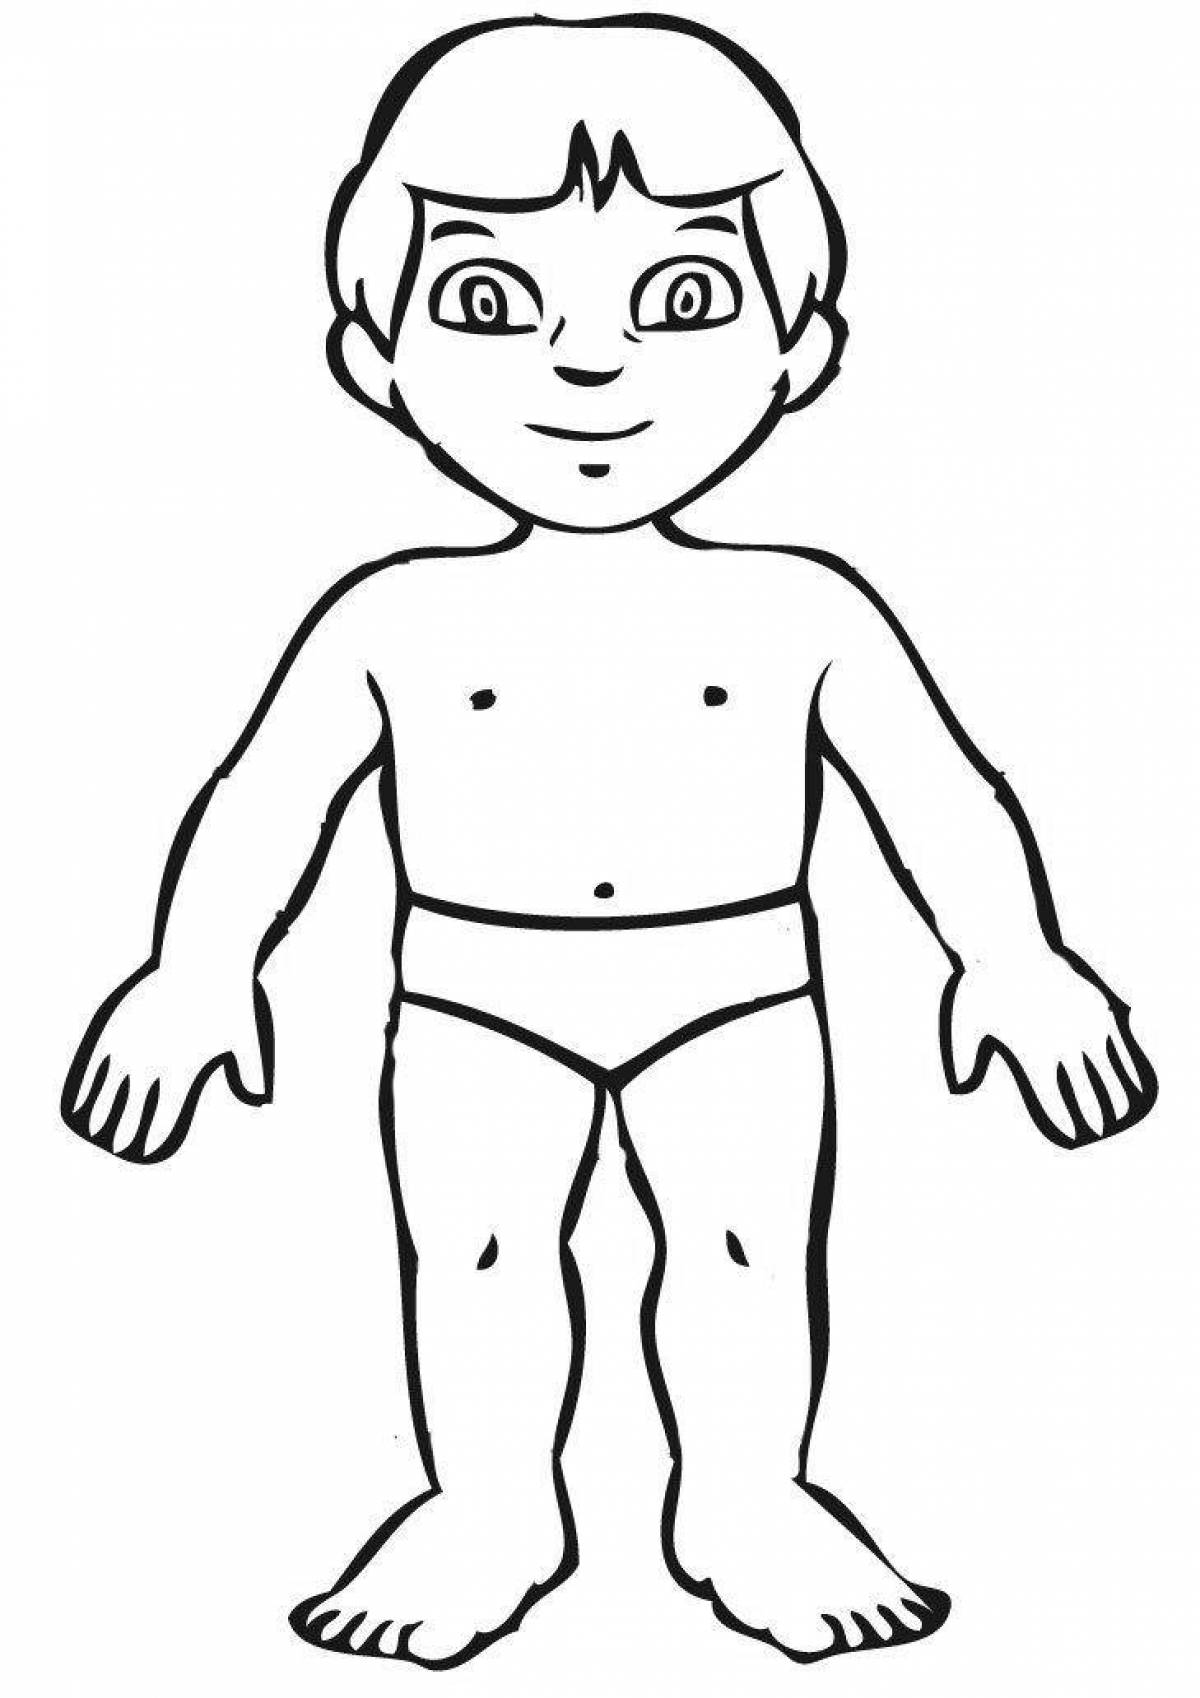 Colorful body coloring page study